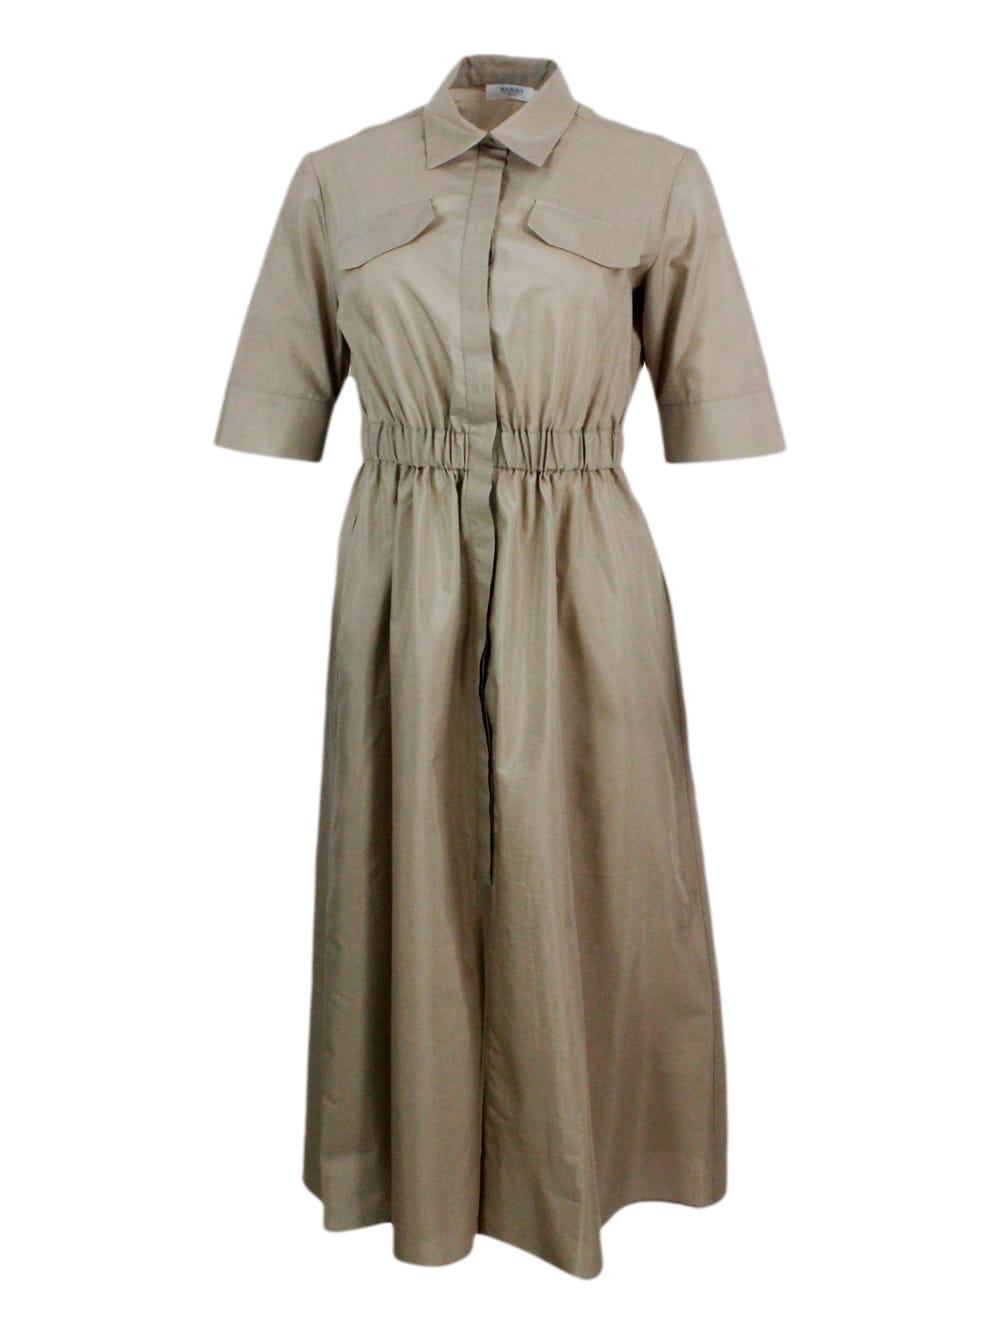 Long Dress Made Of Cotton With Short Sleeves, With Elastic Waist And Button Closure. Welt Pockets